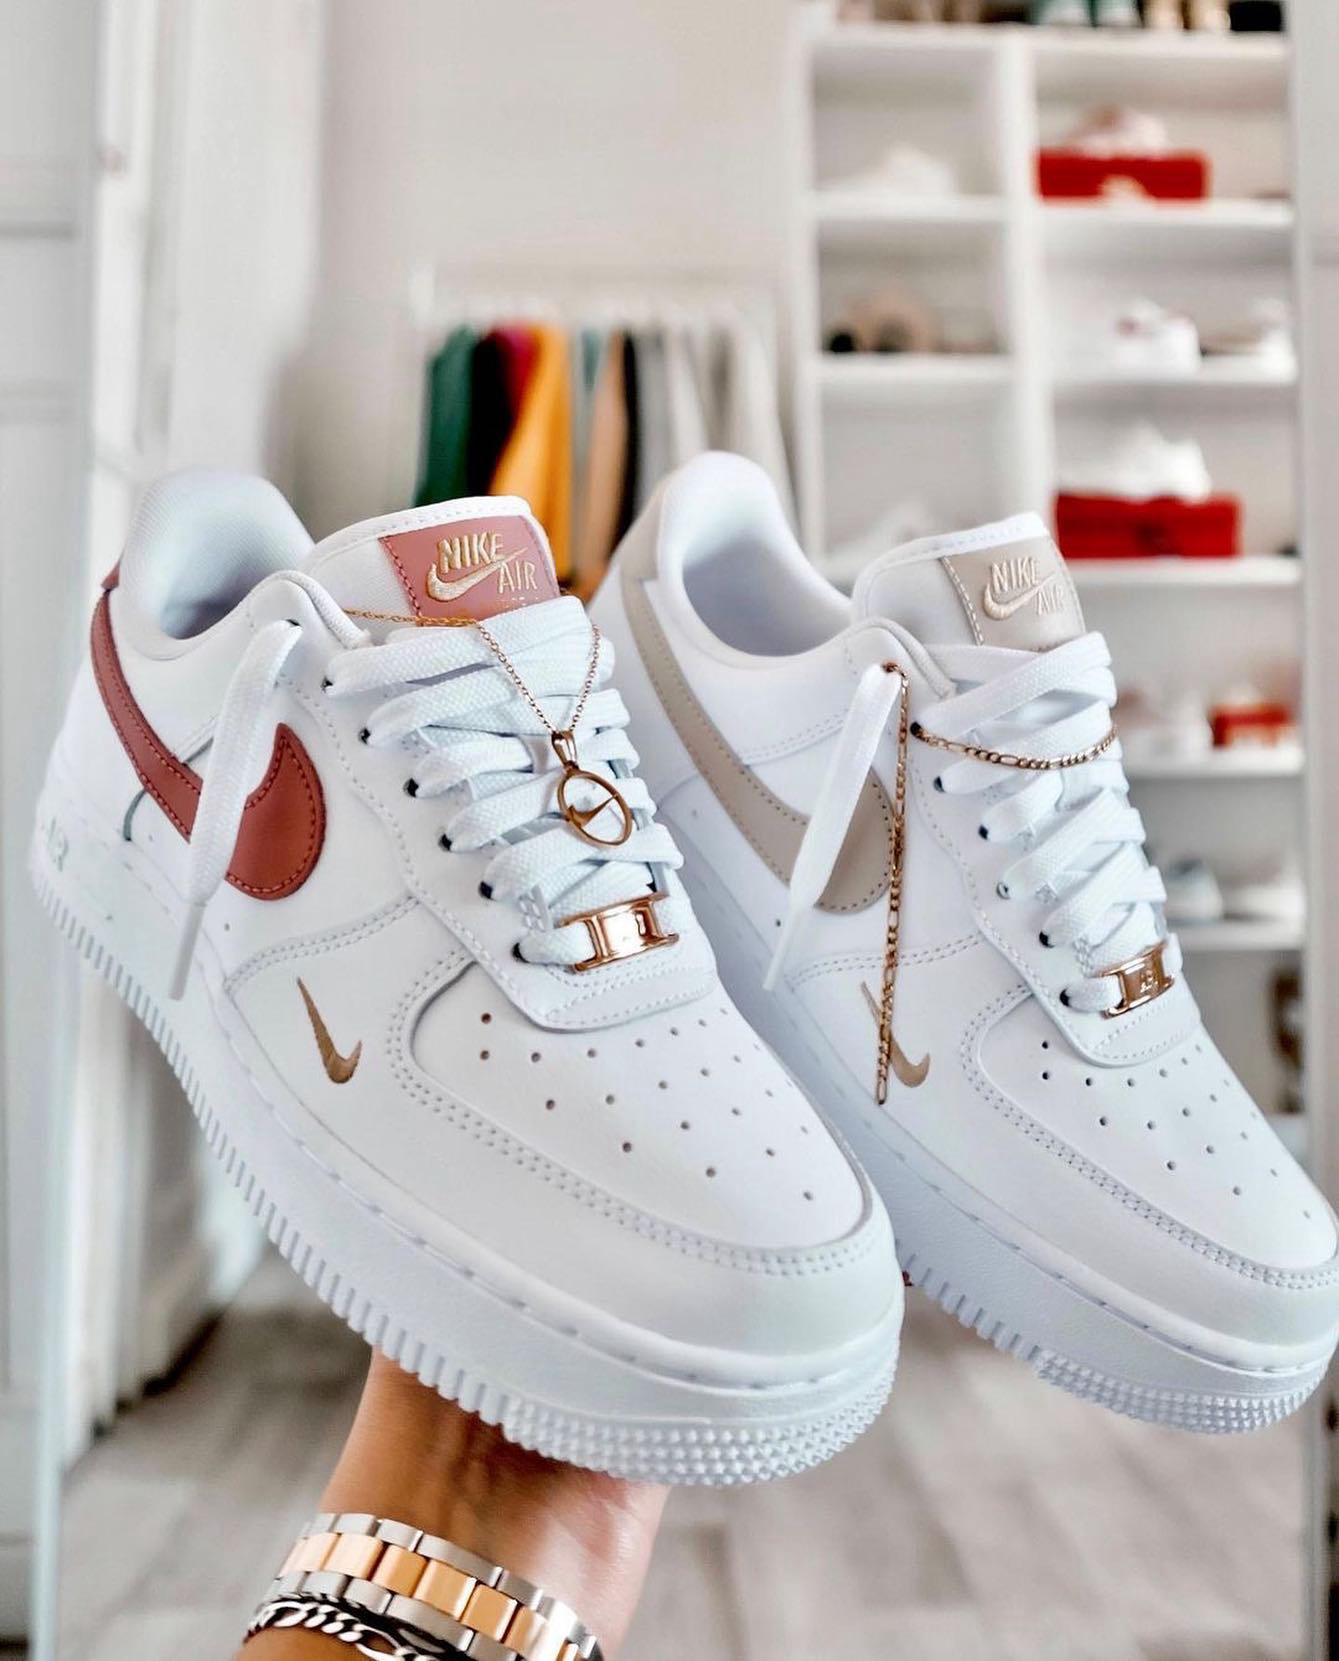 Nike Air Force 1 - Left or Right